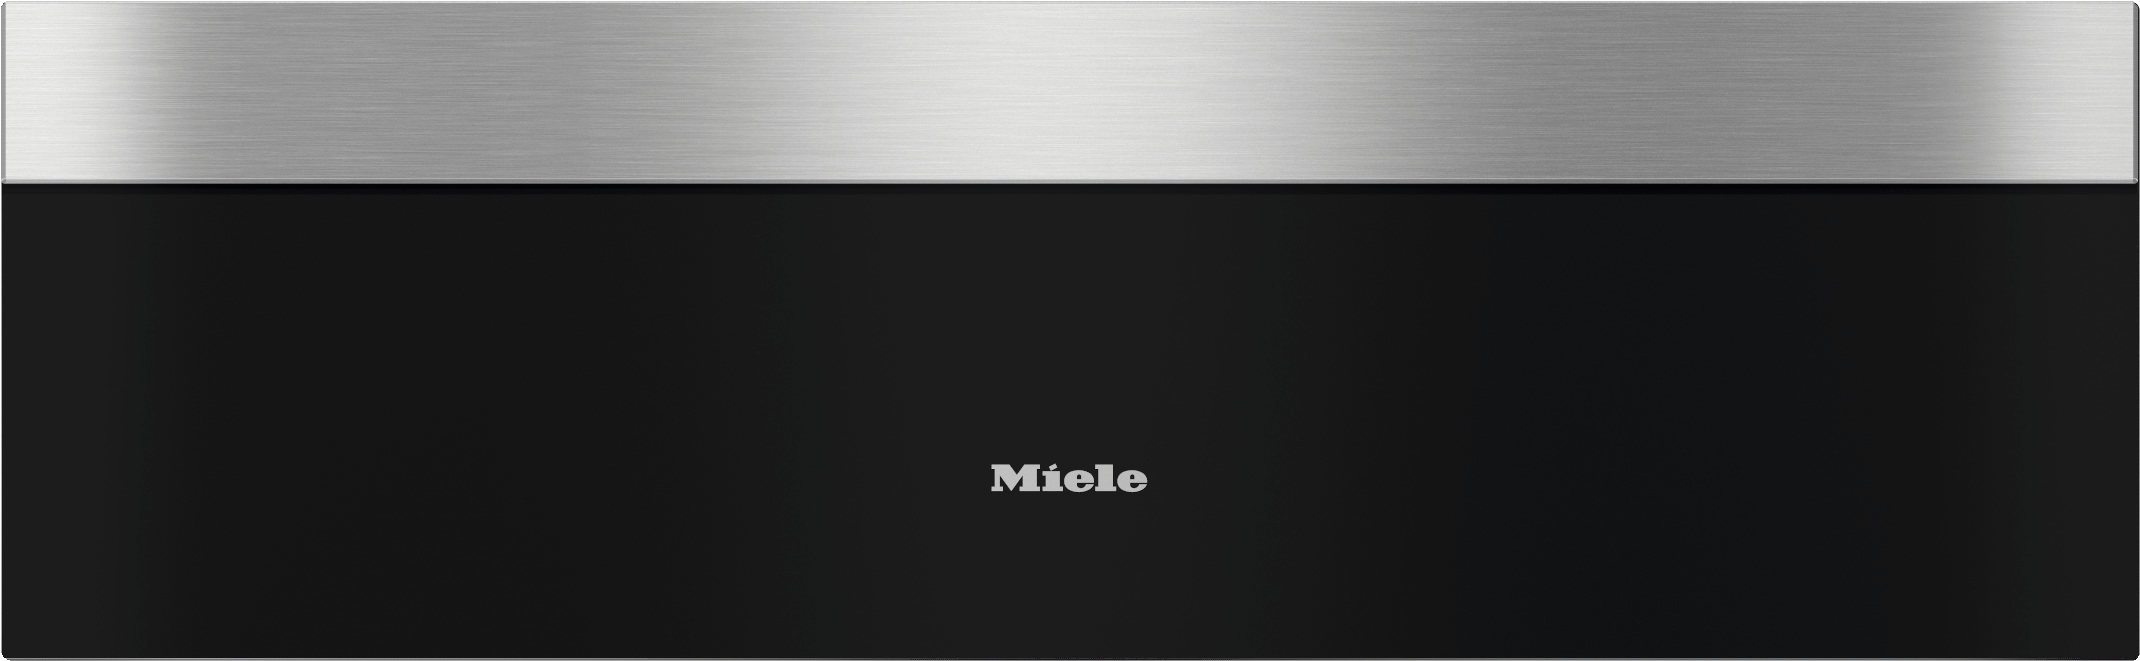 Miele ESW7670 STAINLESS STEEL   Handleless Gourmet Warming Drawer, 30